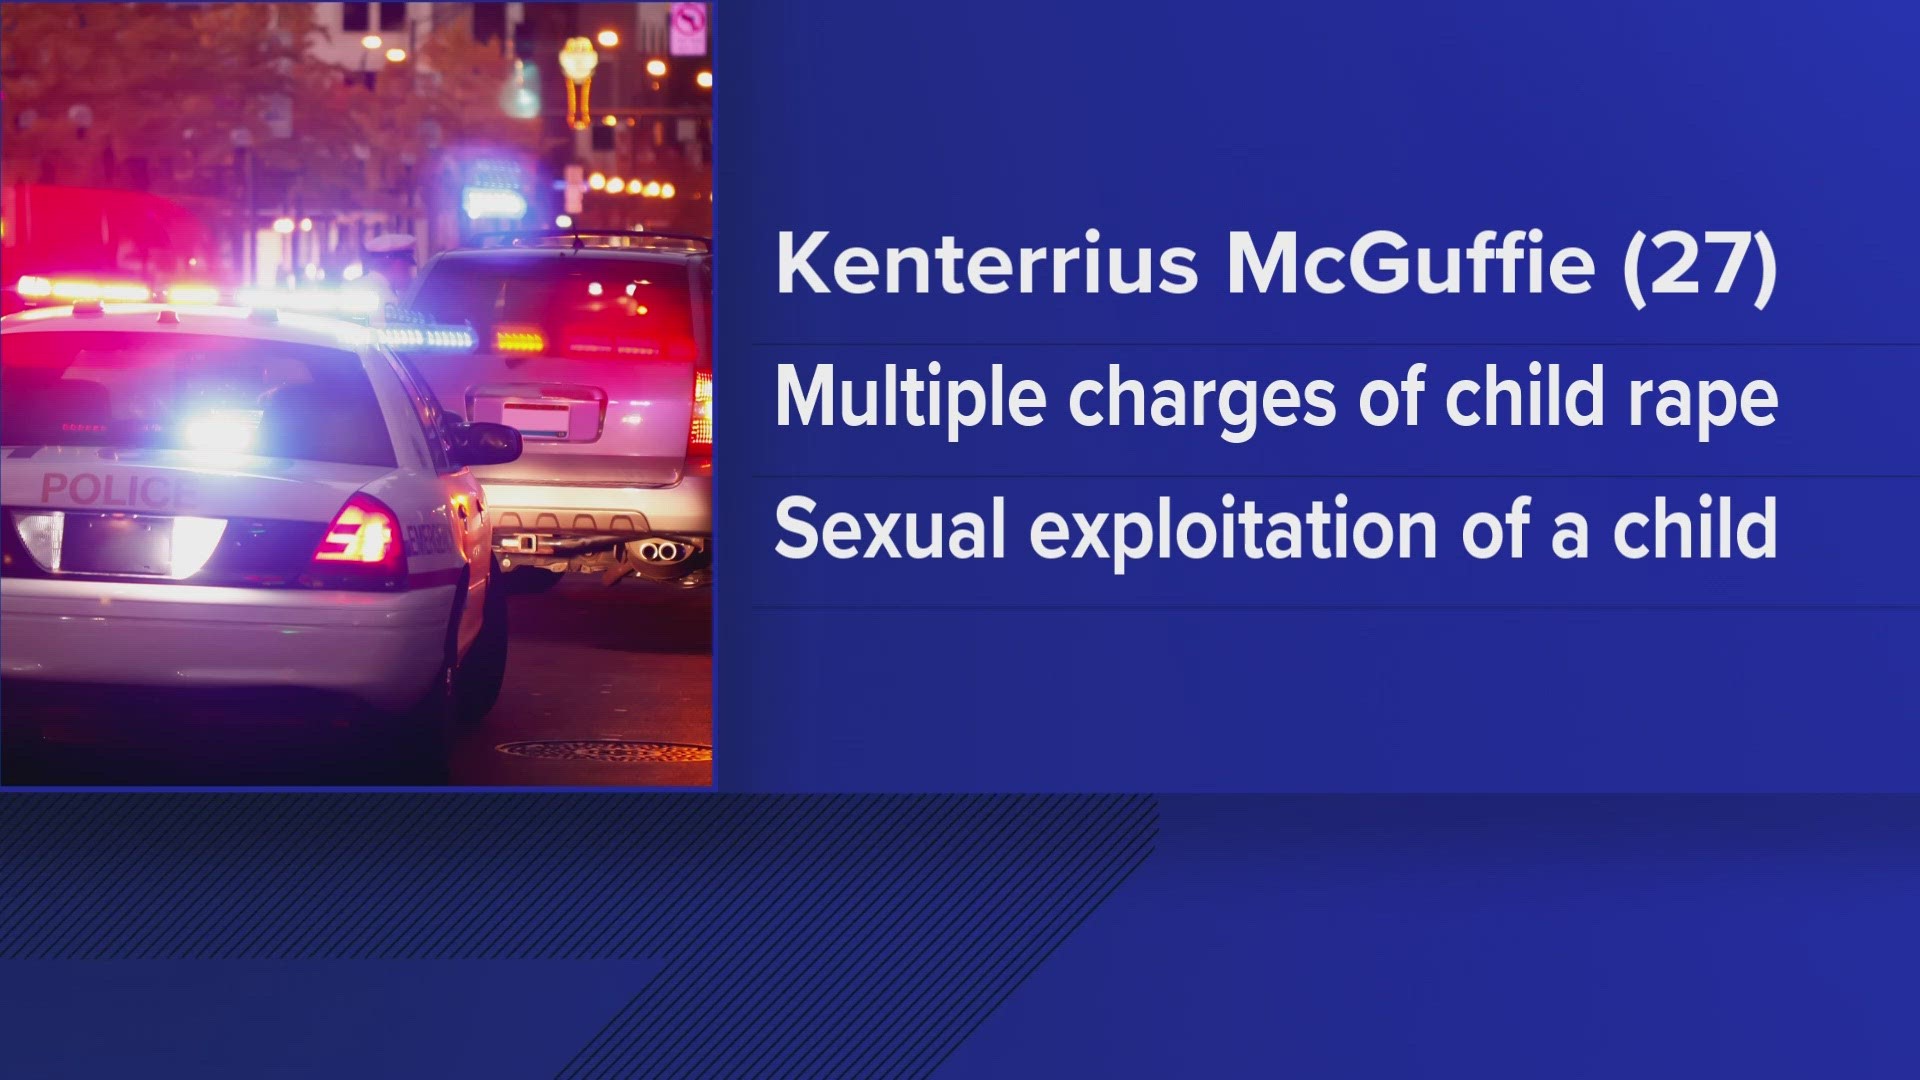 Kenterrius McGuffie, 27, was arrested and TBI said he faces 13 counts of aggravated rape of a child, among several other charges.